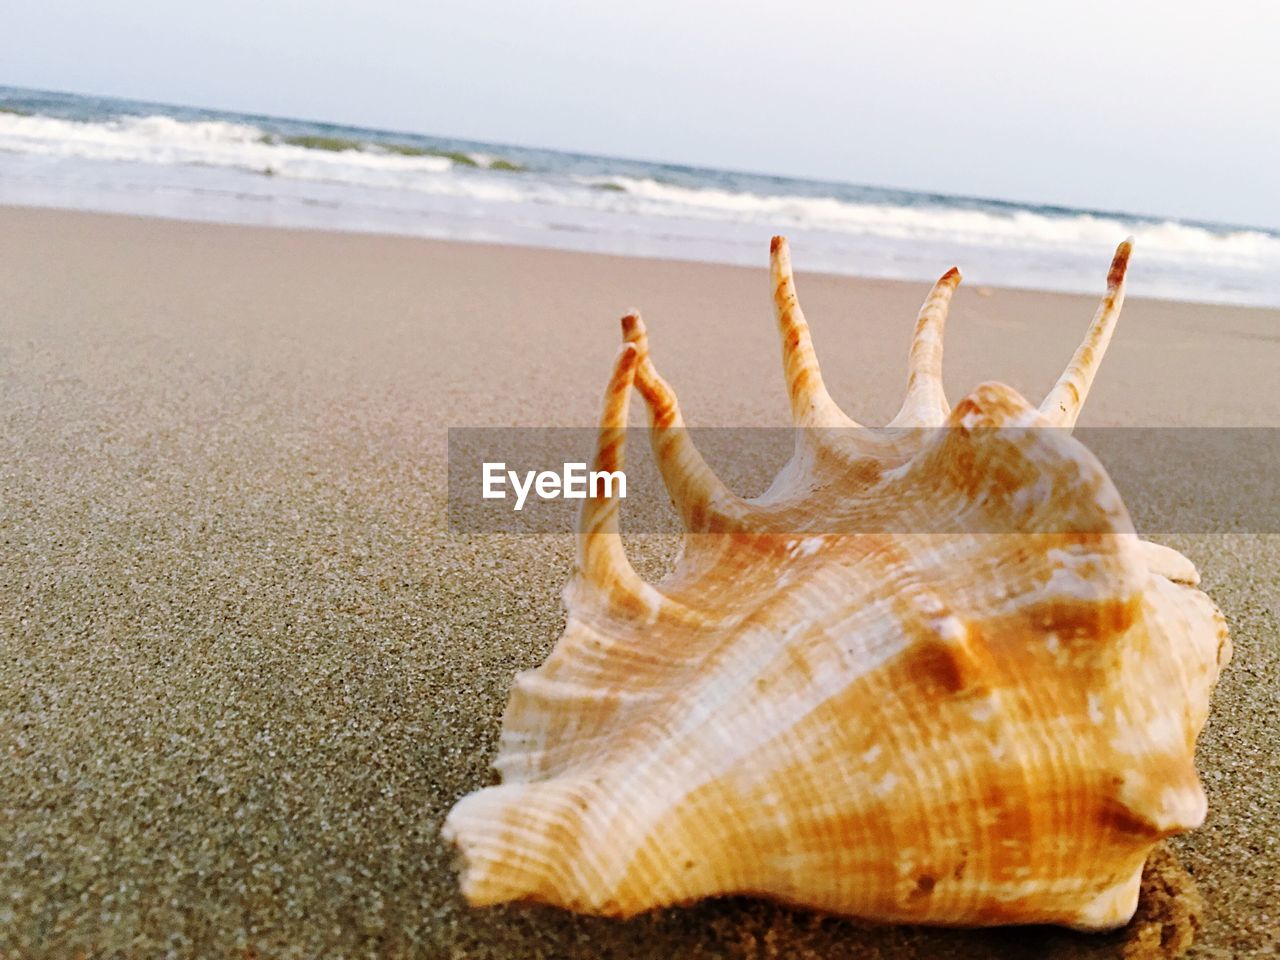 Close-up of conch shell on shore at beach against sky